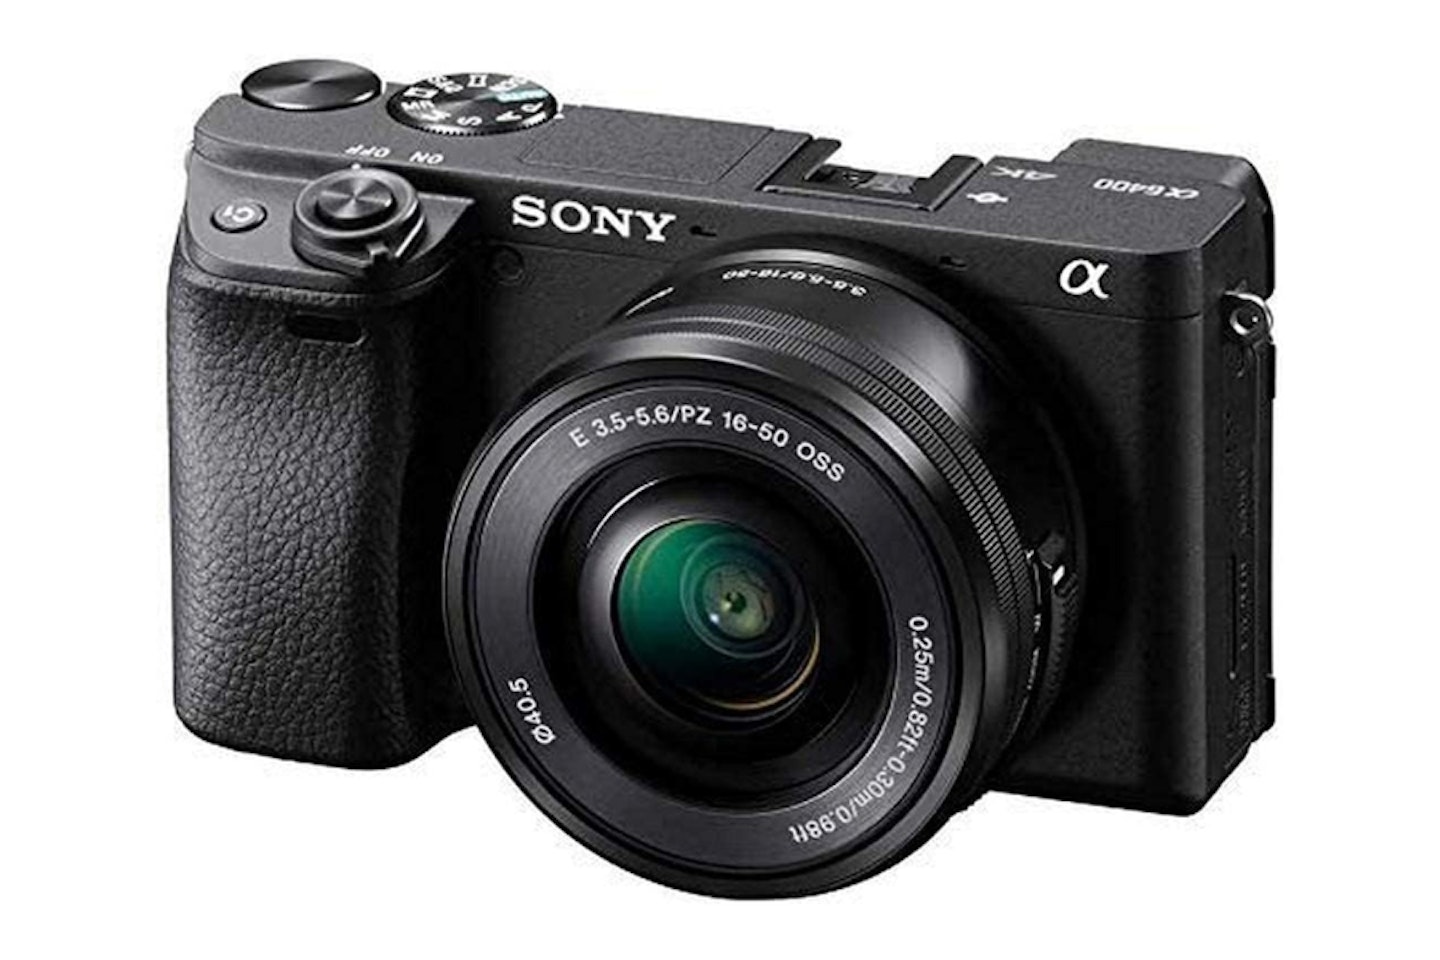 Sony Alpha 6400 - one of the best mirrorless cameras